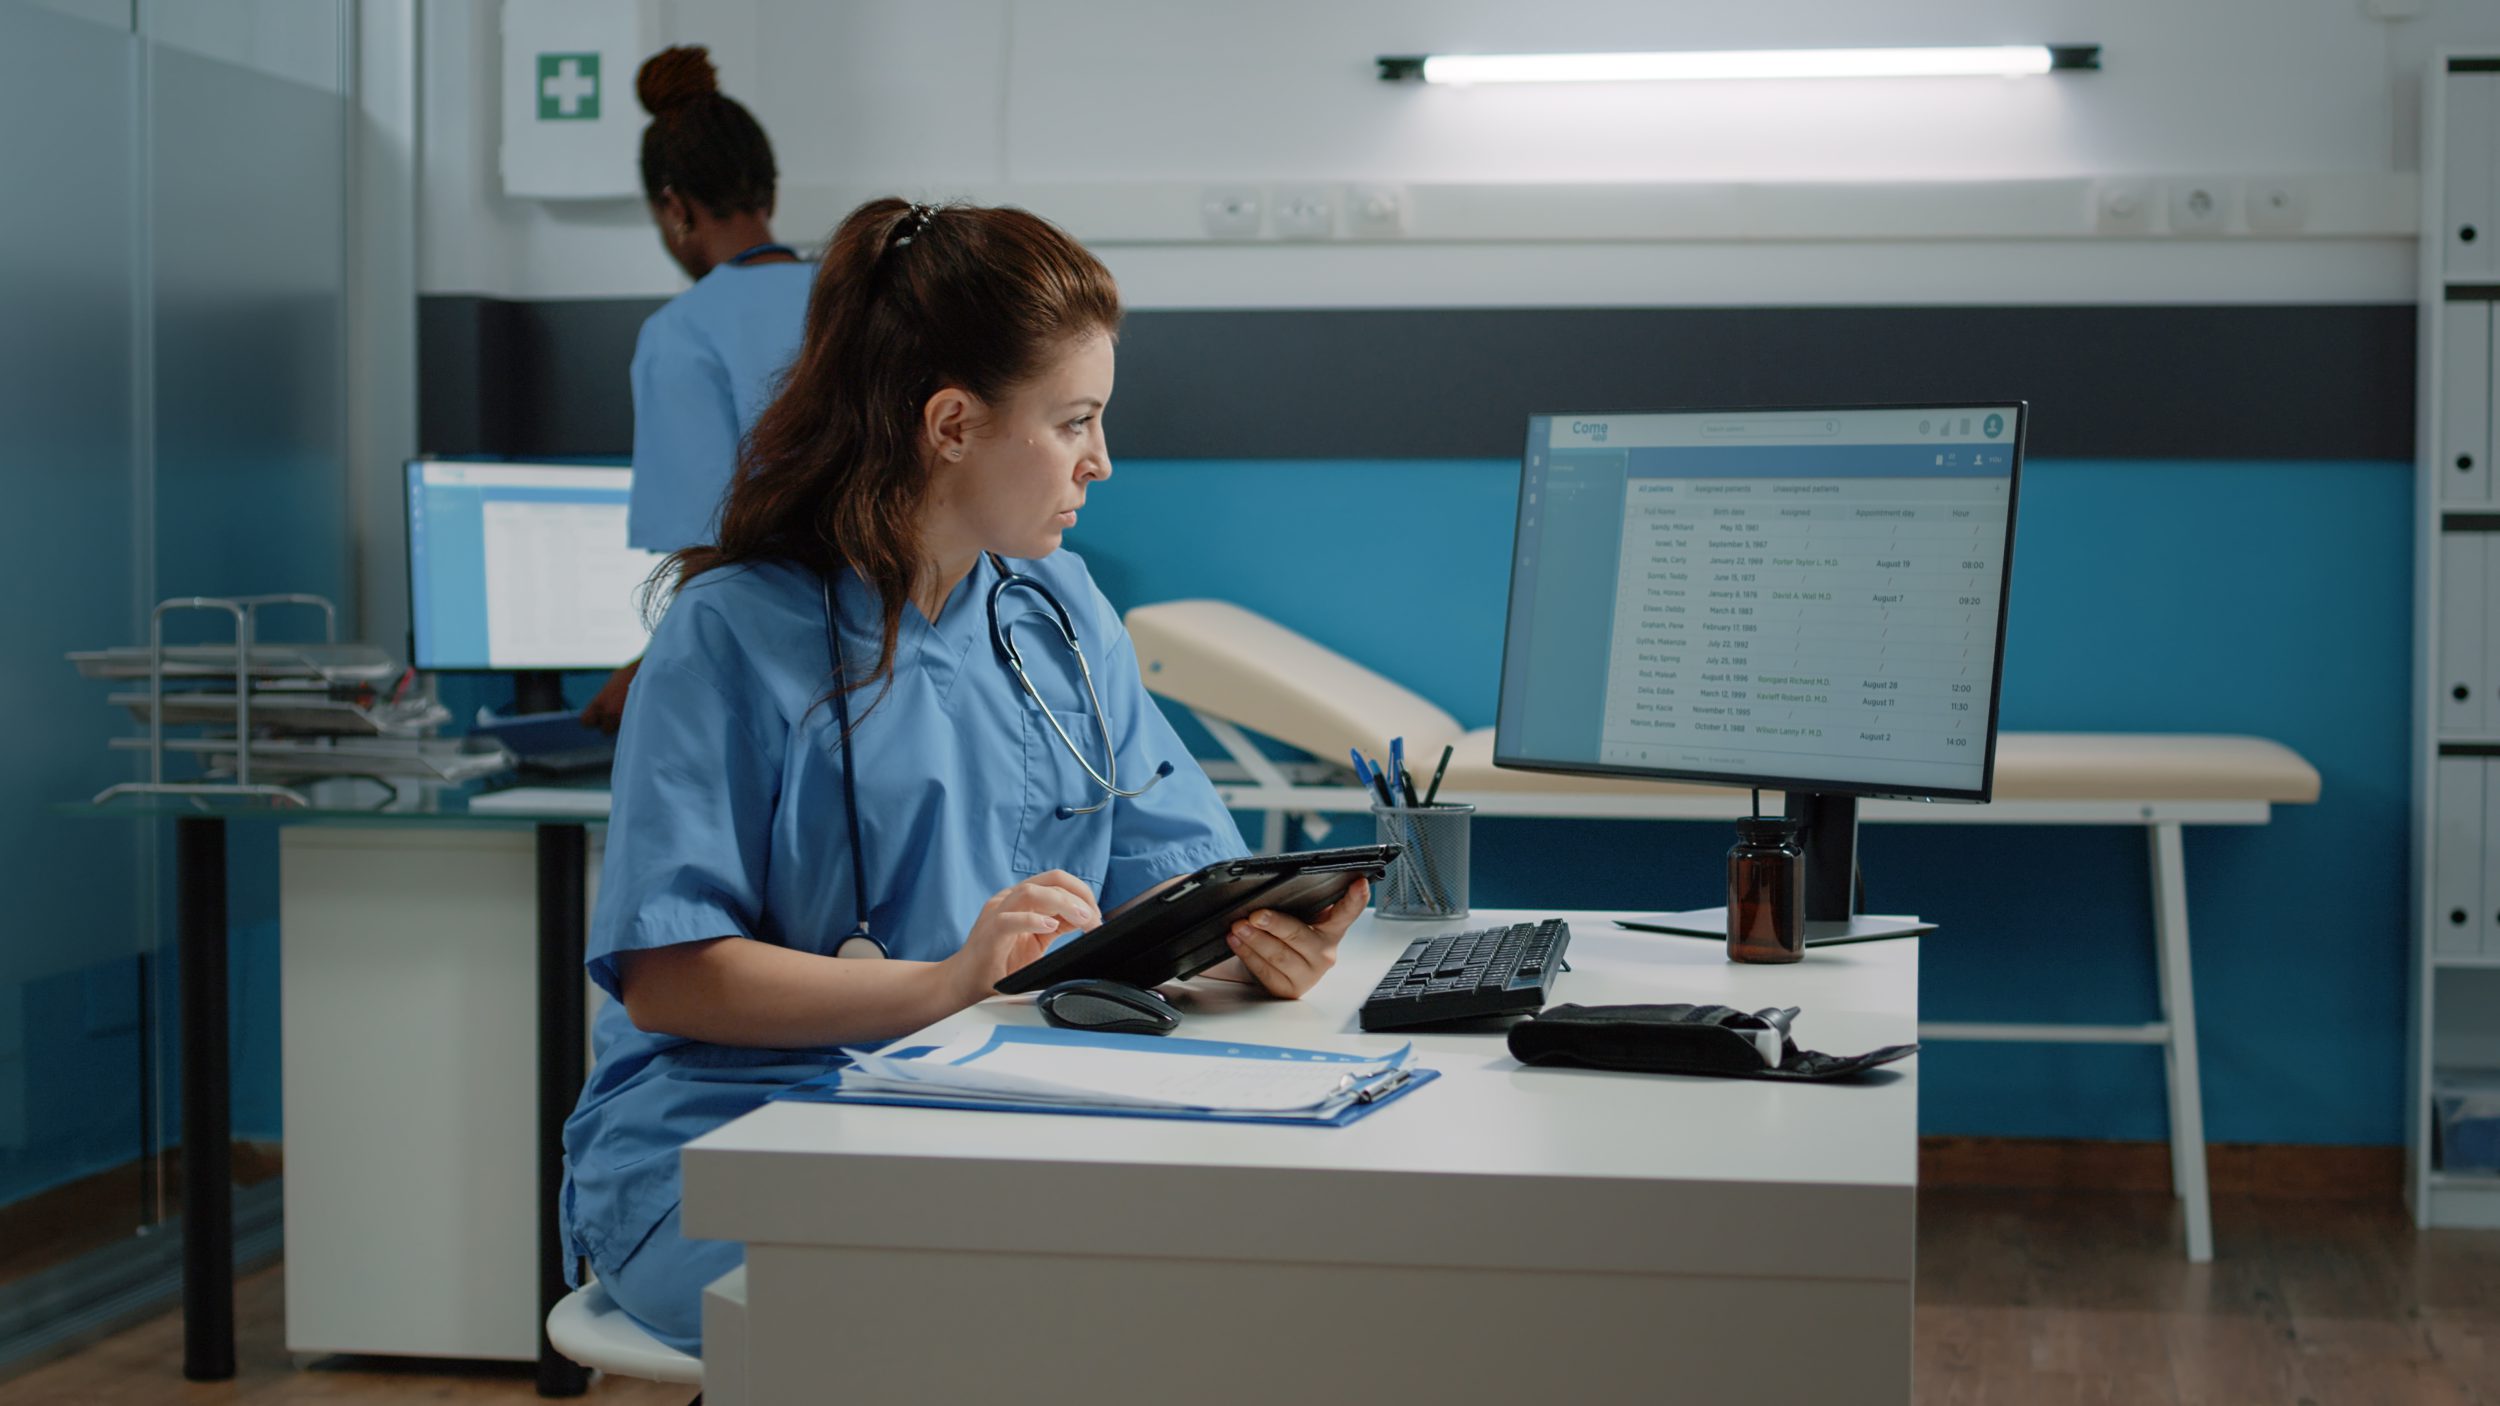 Nurse charting and looking at monitor while using modern gadget for healthcare checkup visit.